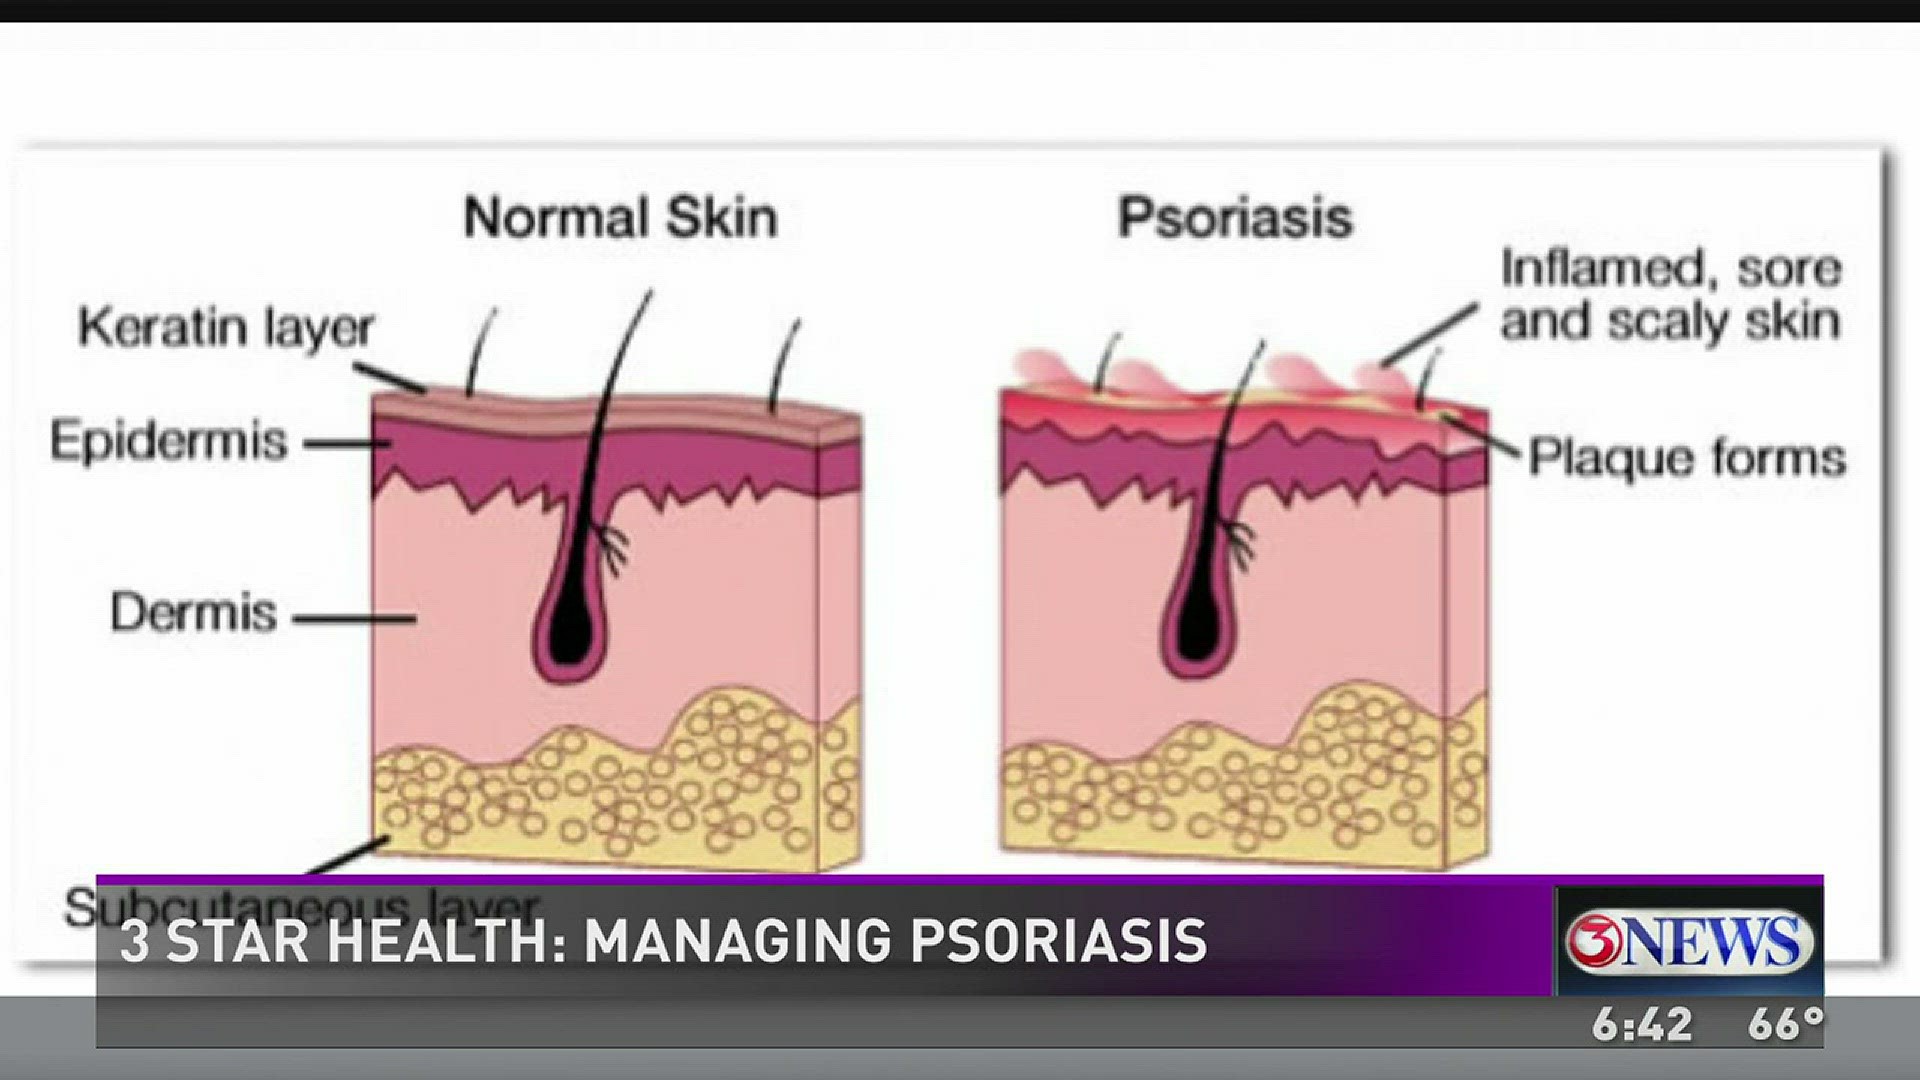 Brian Burns talks with Dr. Salim Surani about managing the skin condition psoriasis.